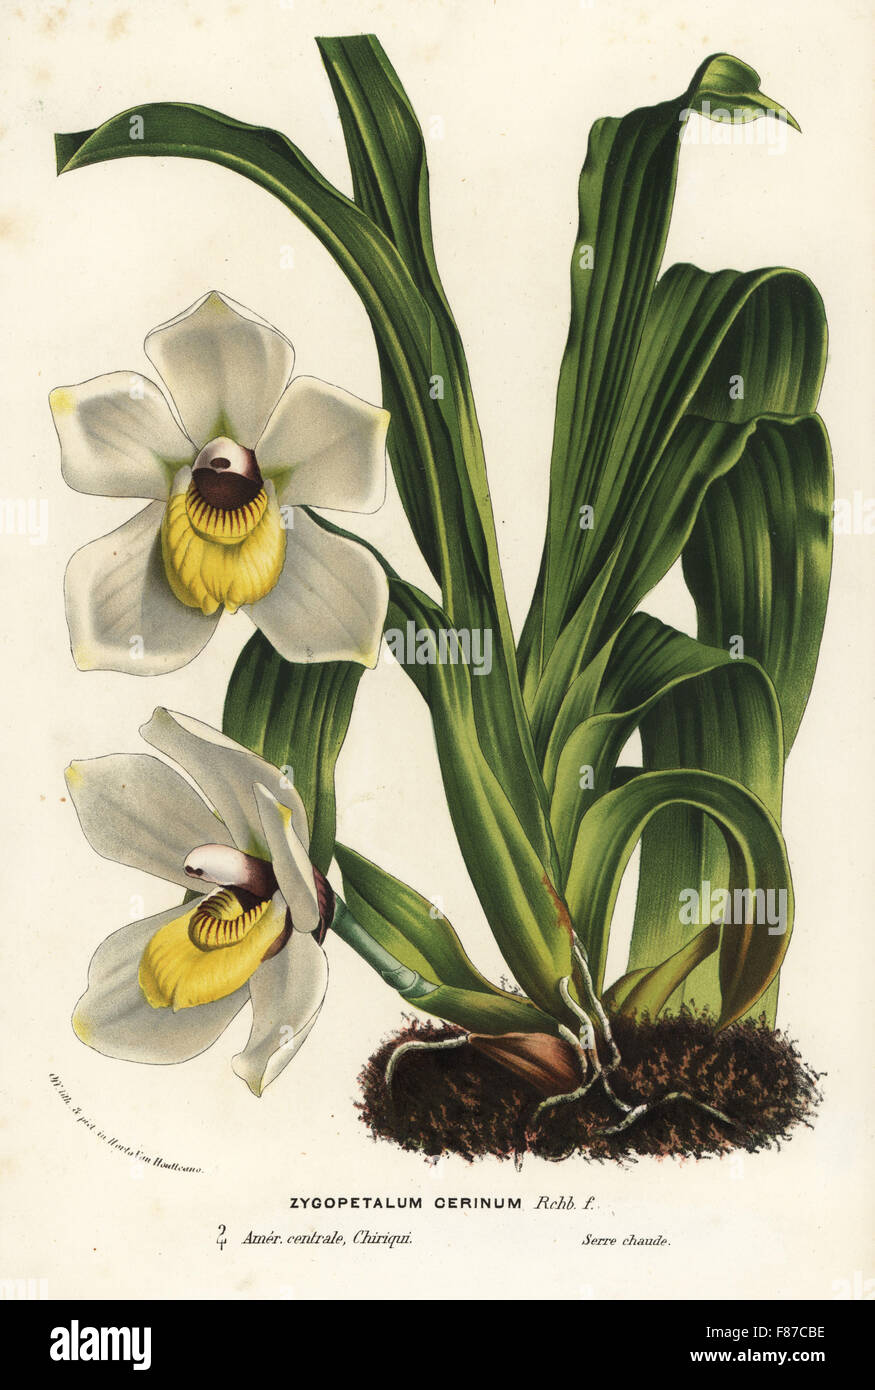 Pescatoria cerina orchid (Zygopetalum cerinum). Handcoloured lithograph from Louis van Houtte and Charles Lemaire's Flowers of the Gardens and Hothouses of Europe, Flore des Serres et des Jardins de l'Europe, Ghent, Belgium, 1867-1868. Stock Photo